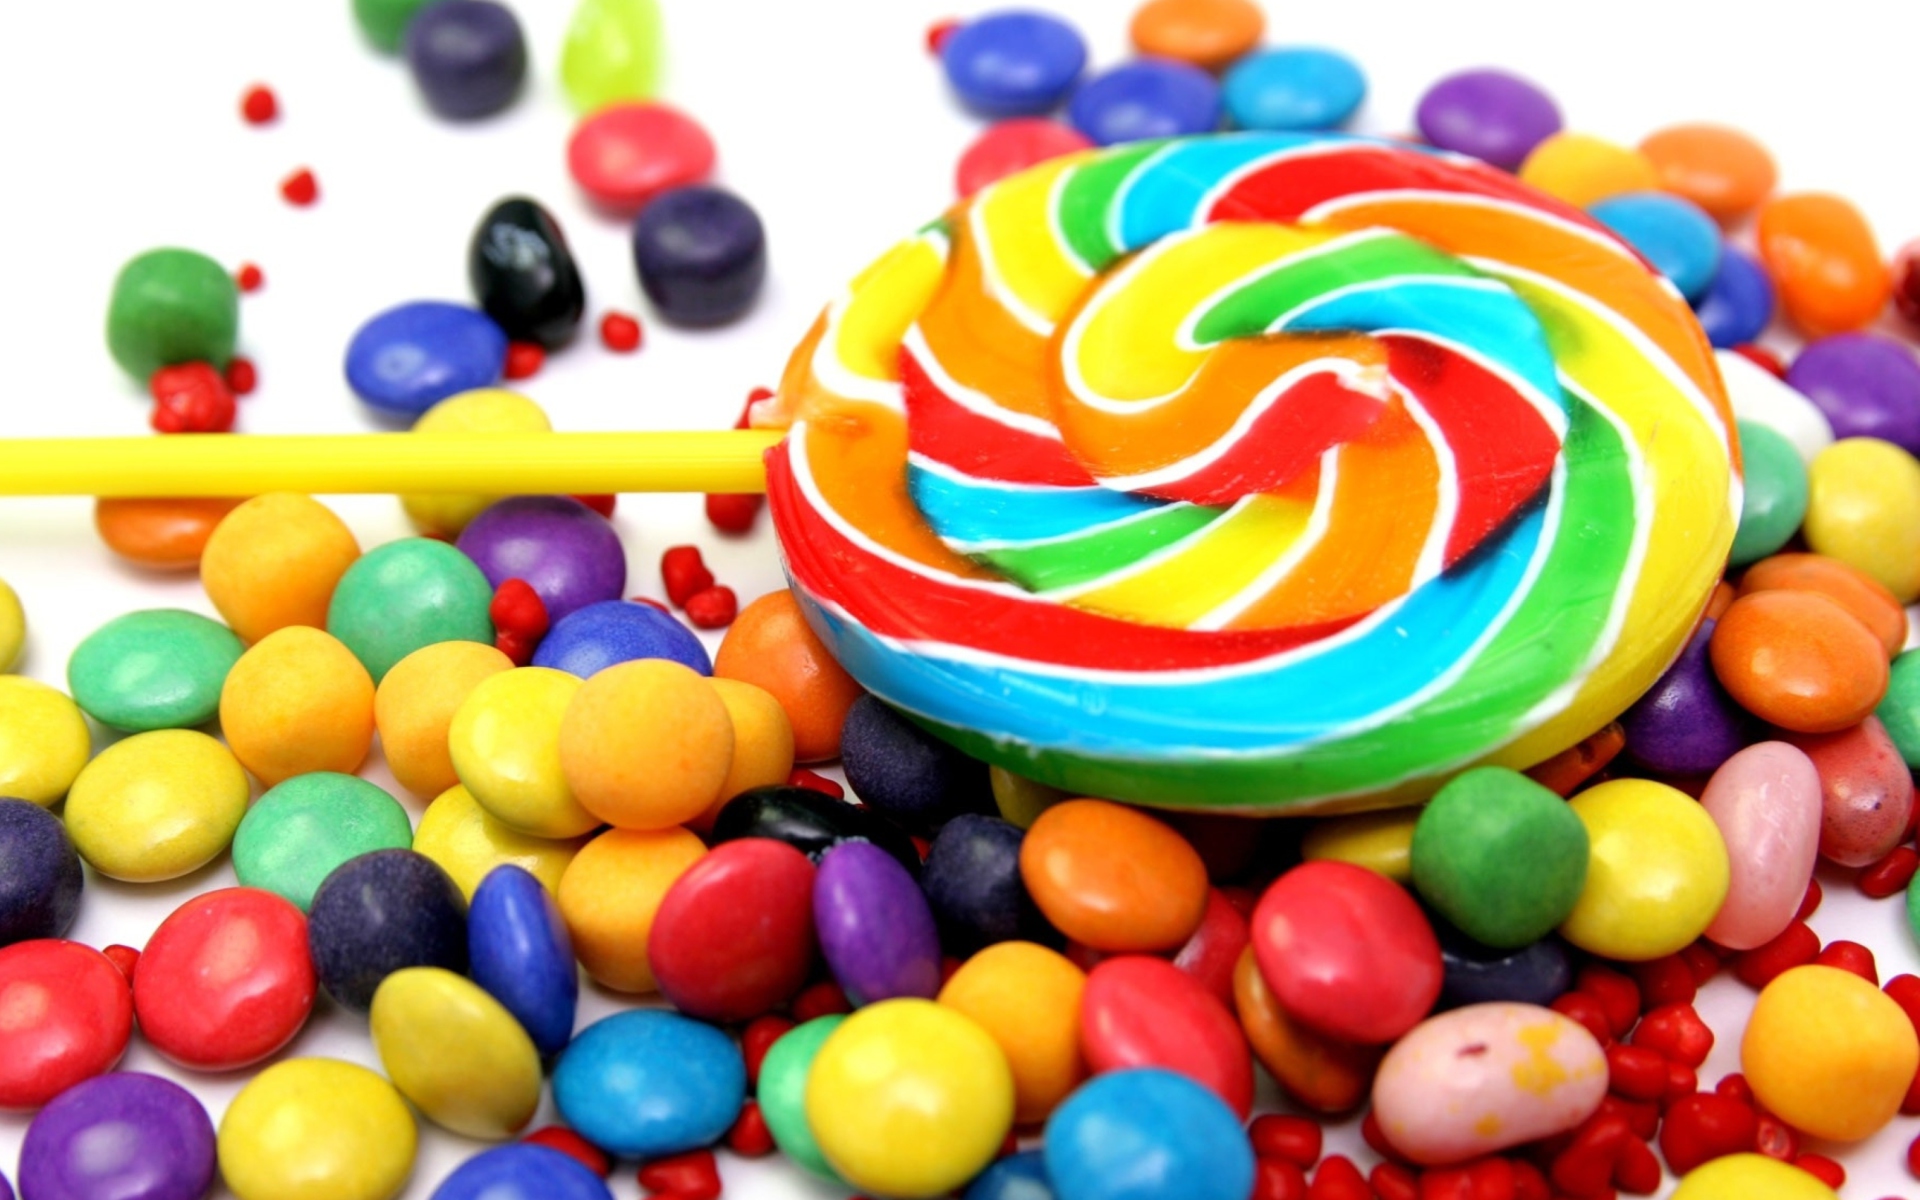 Colorful Candies wallpaper 1920x1200